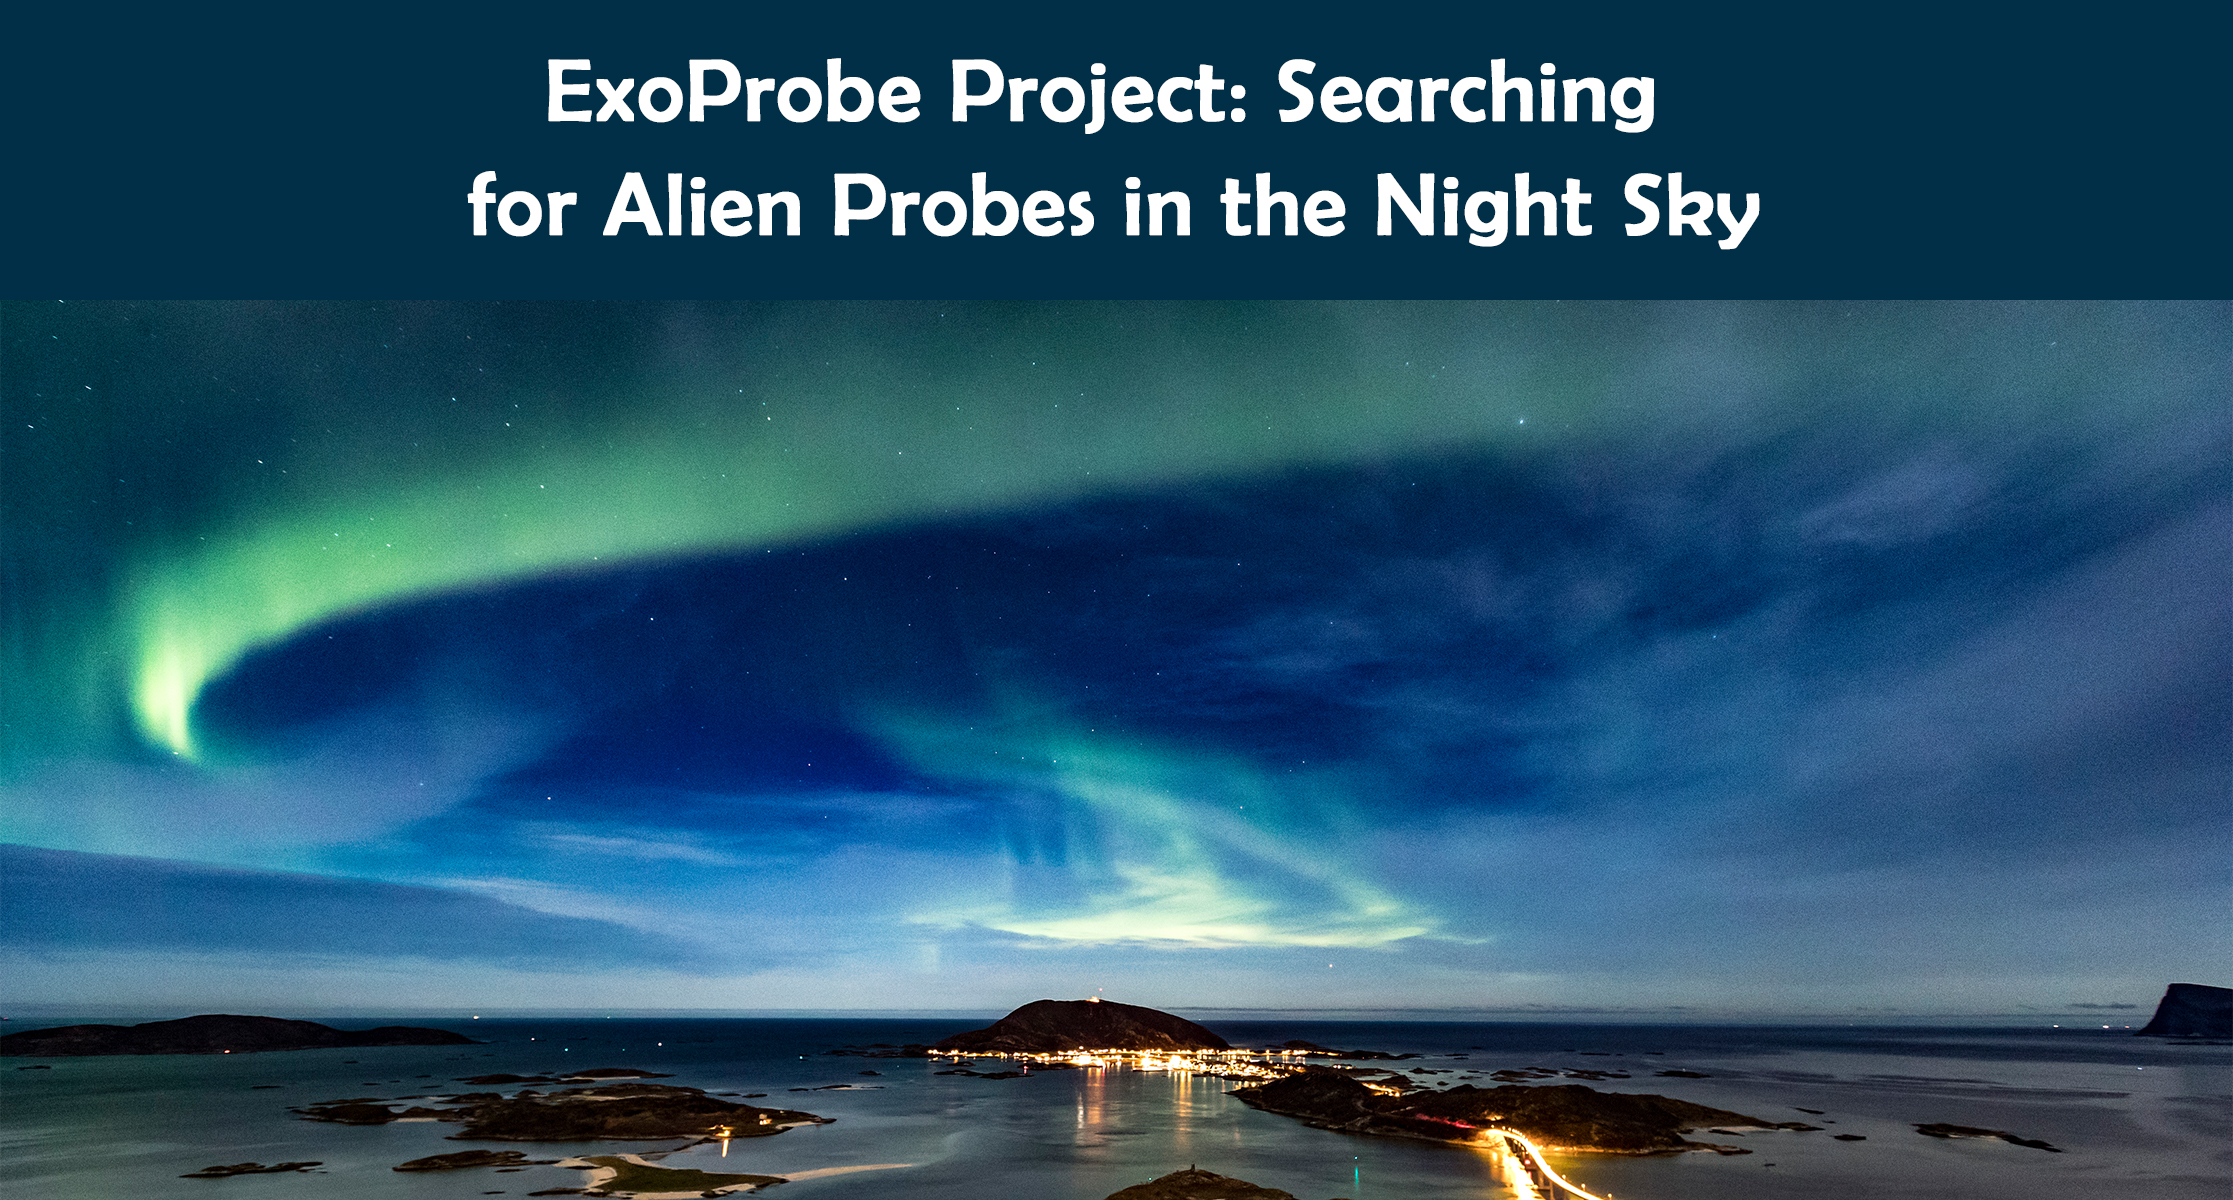 ExoProbe Project: Searching for Alien Probes in the Night Sky